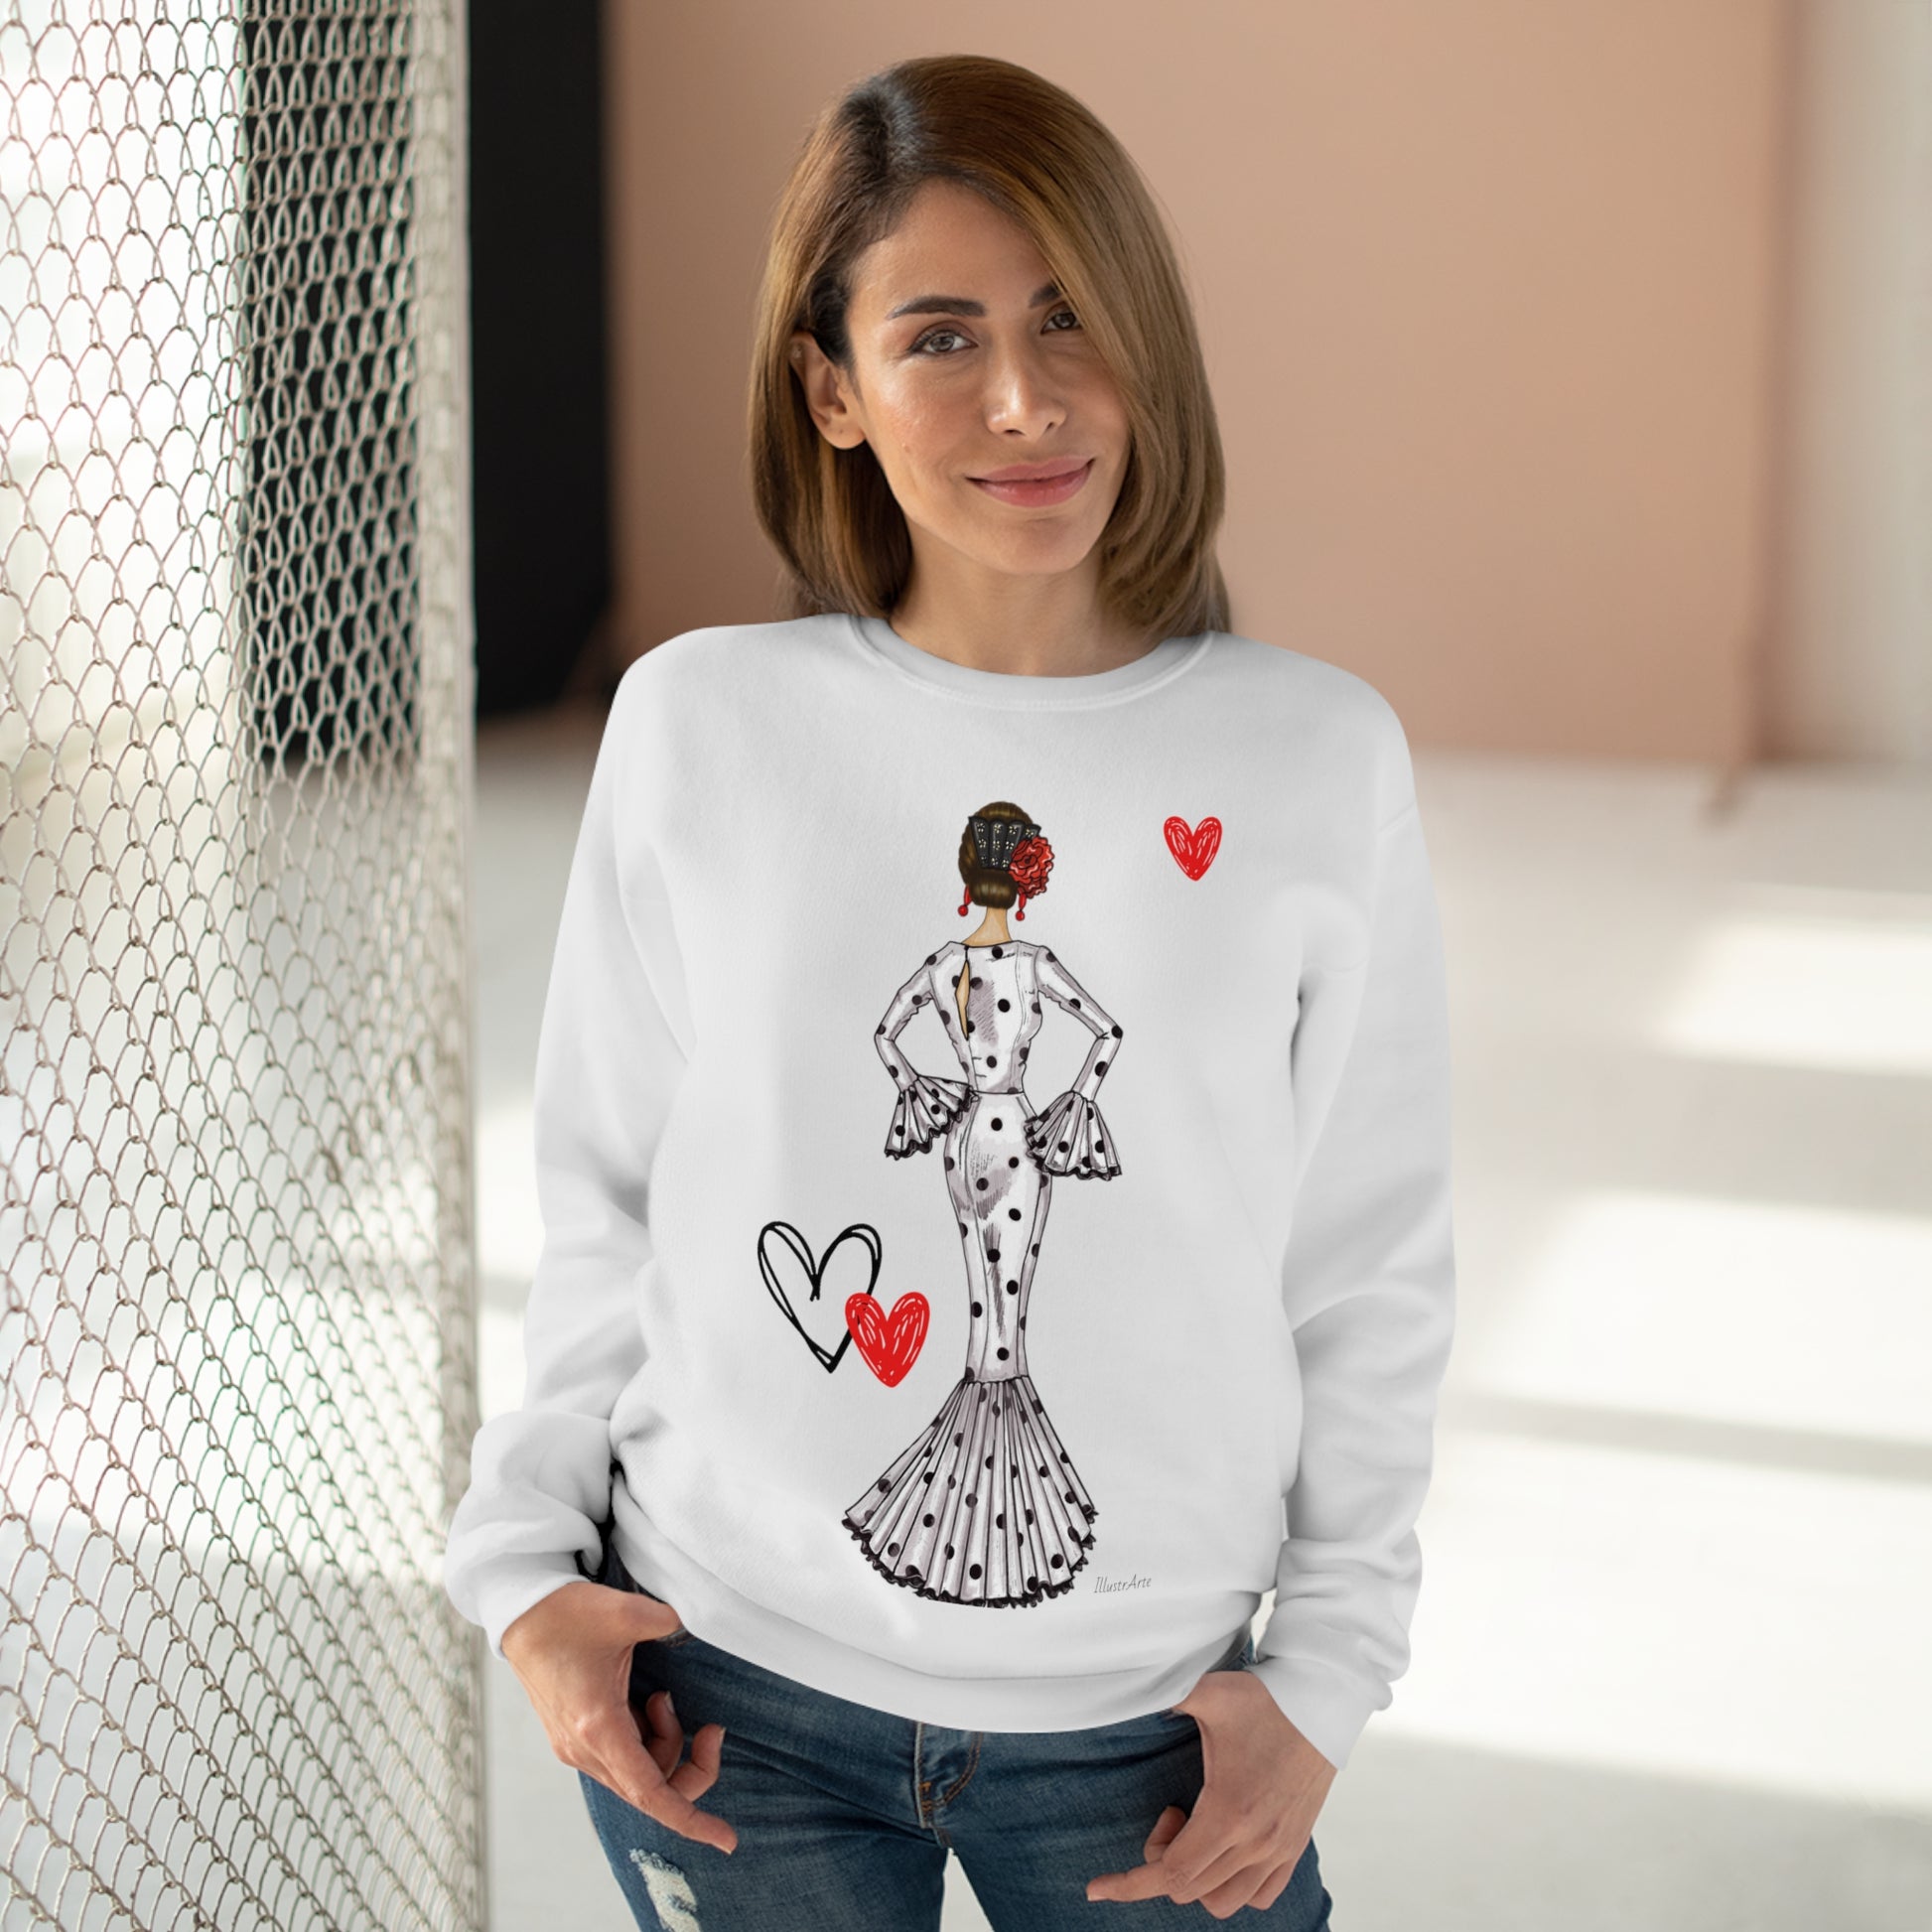 a woman wearing a white sweater with a picture of a woman on it